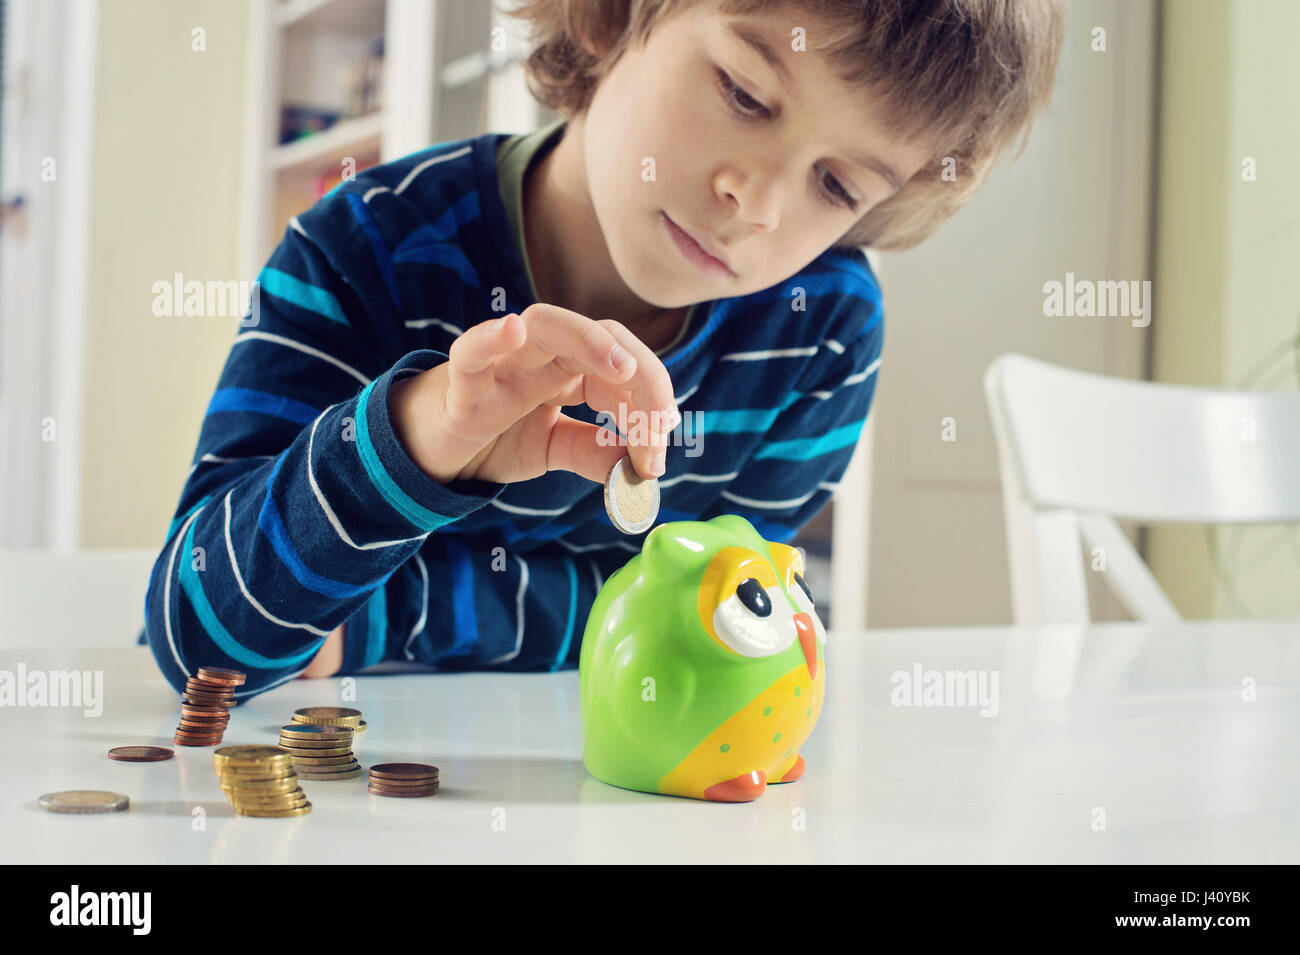 Little boy putting coins into owl piggy bank. Learning financial responsibility and projecting savings. Stock Photo